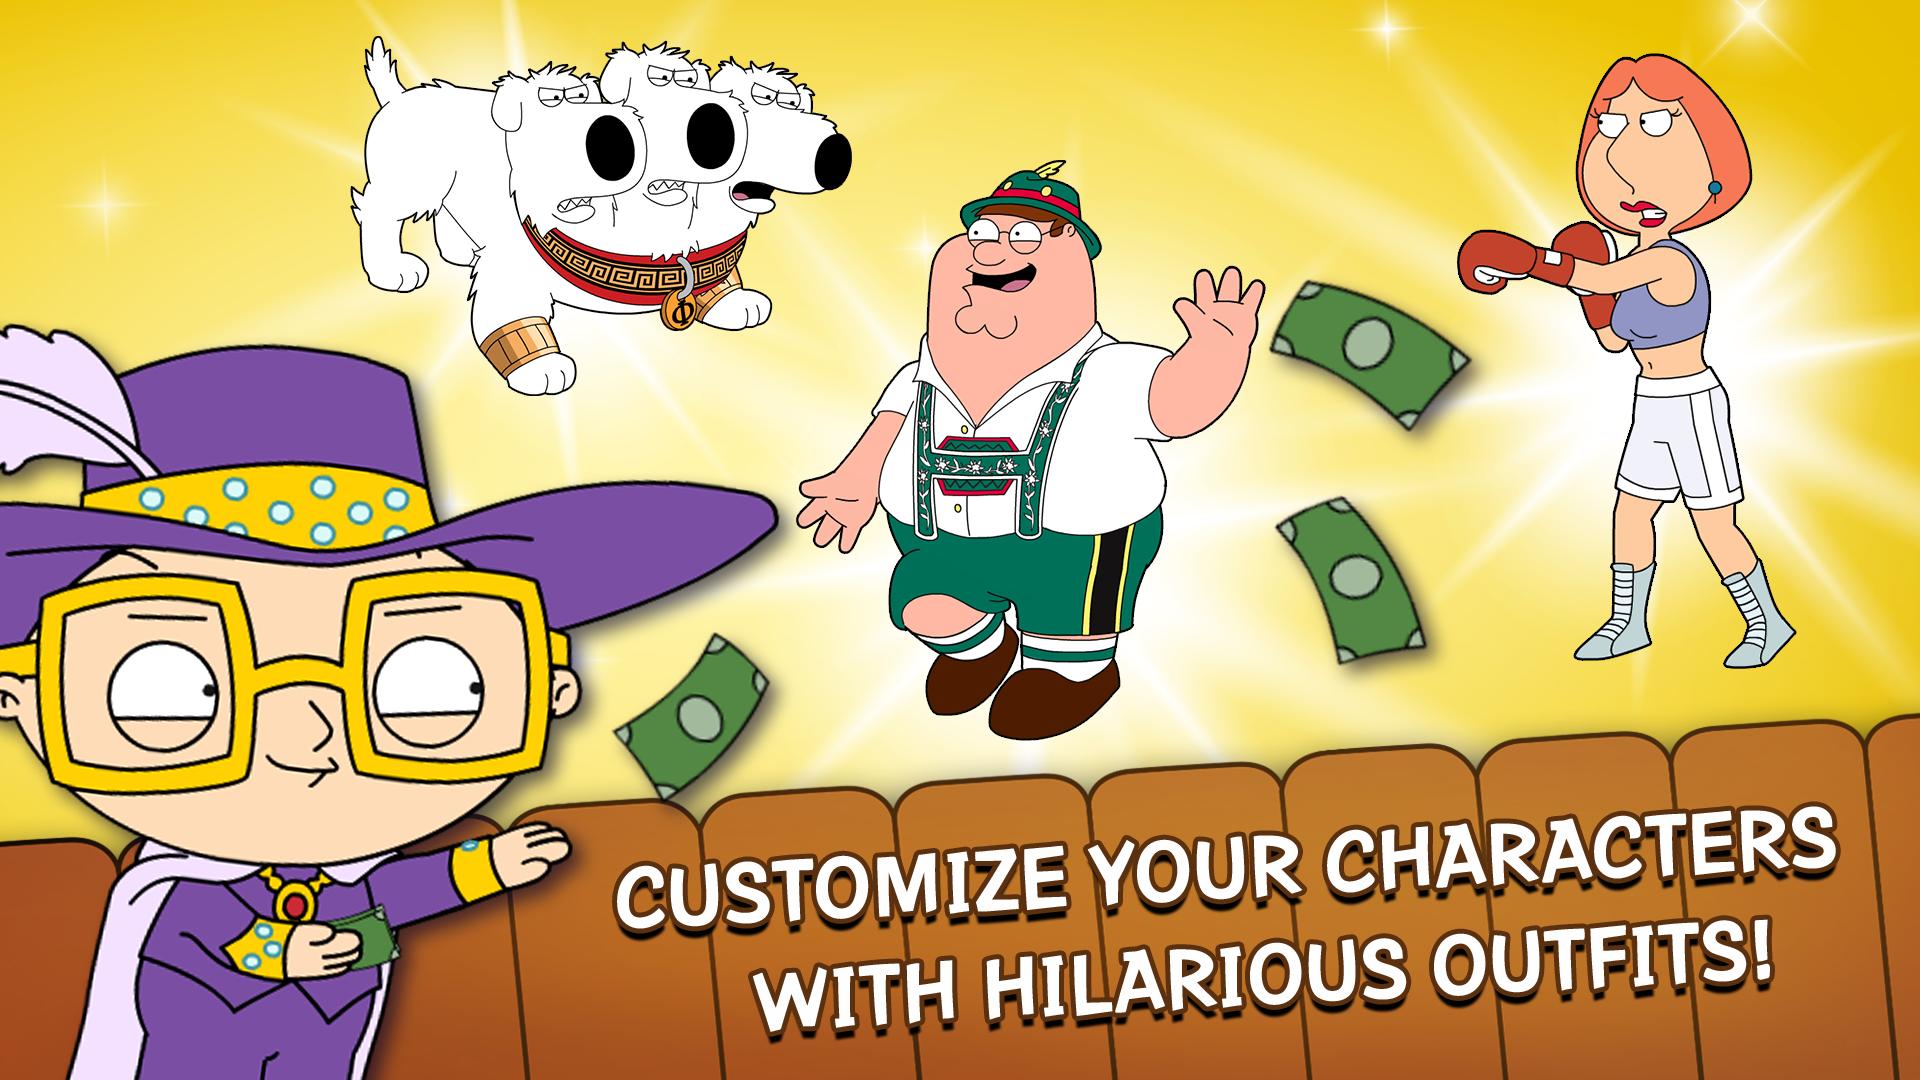 Family Guy The Quest for Stuff 3.8.1 Screenshot 4